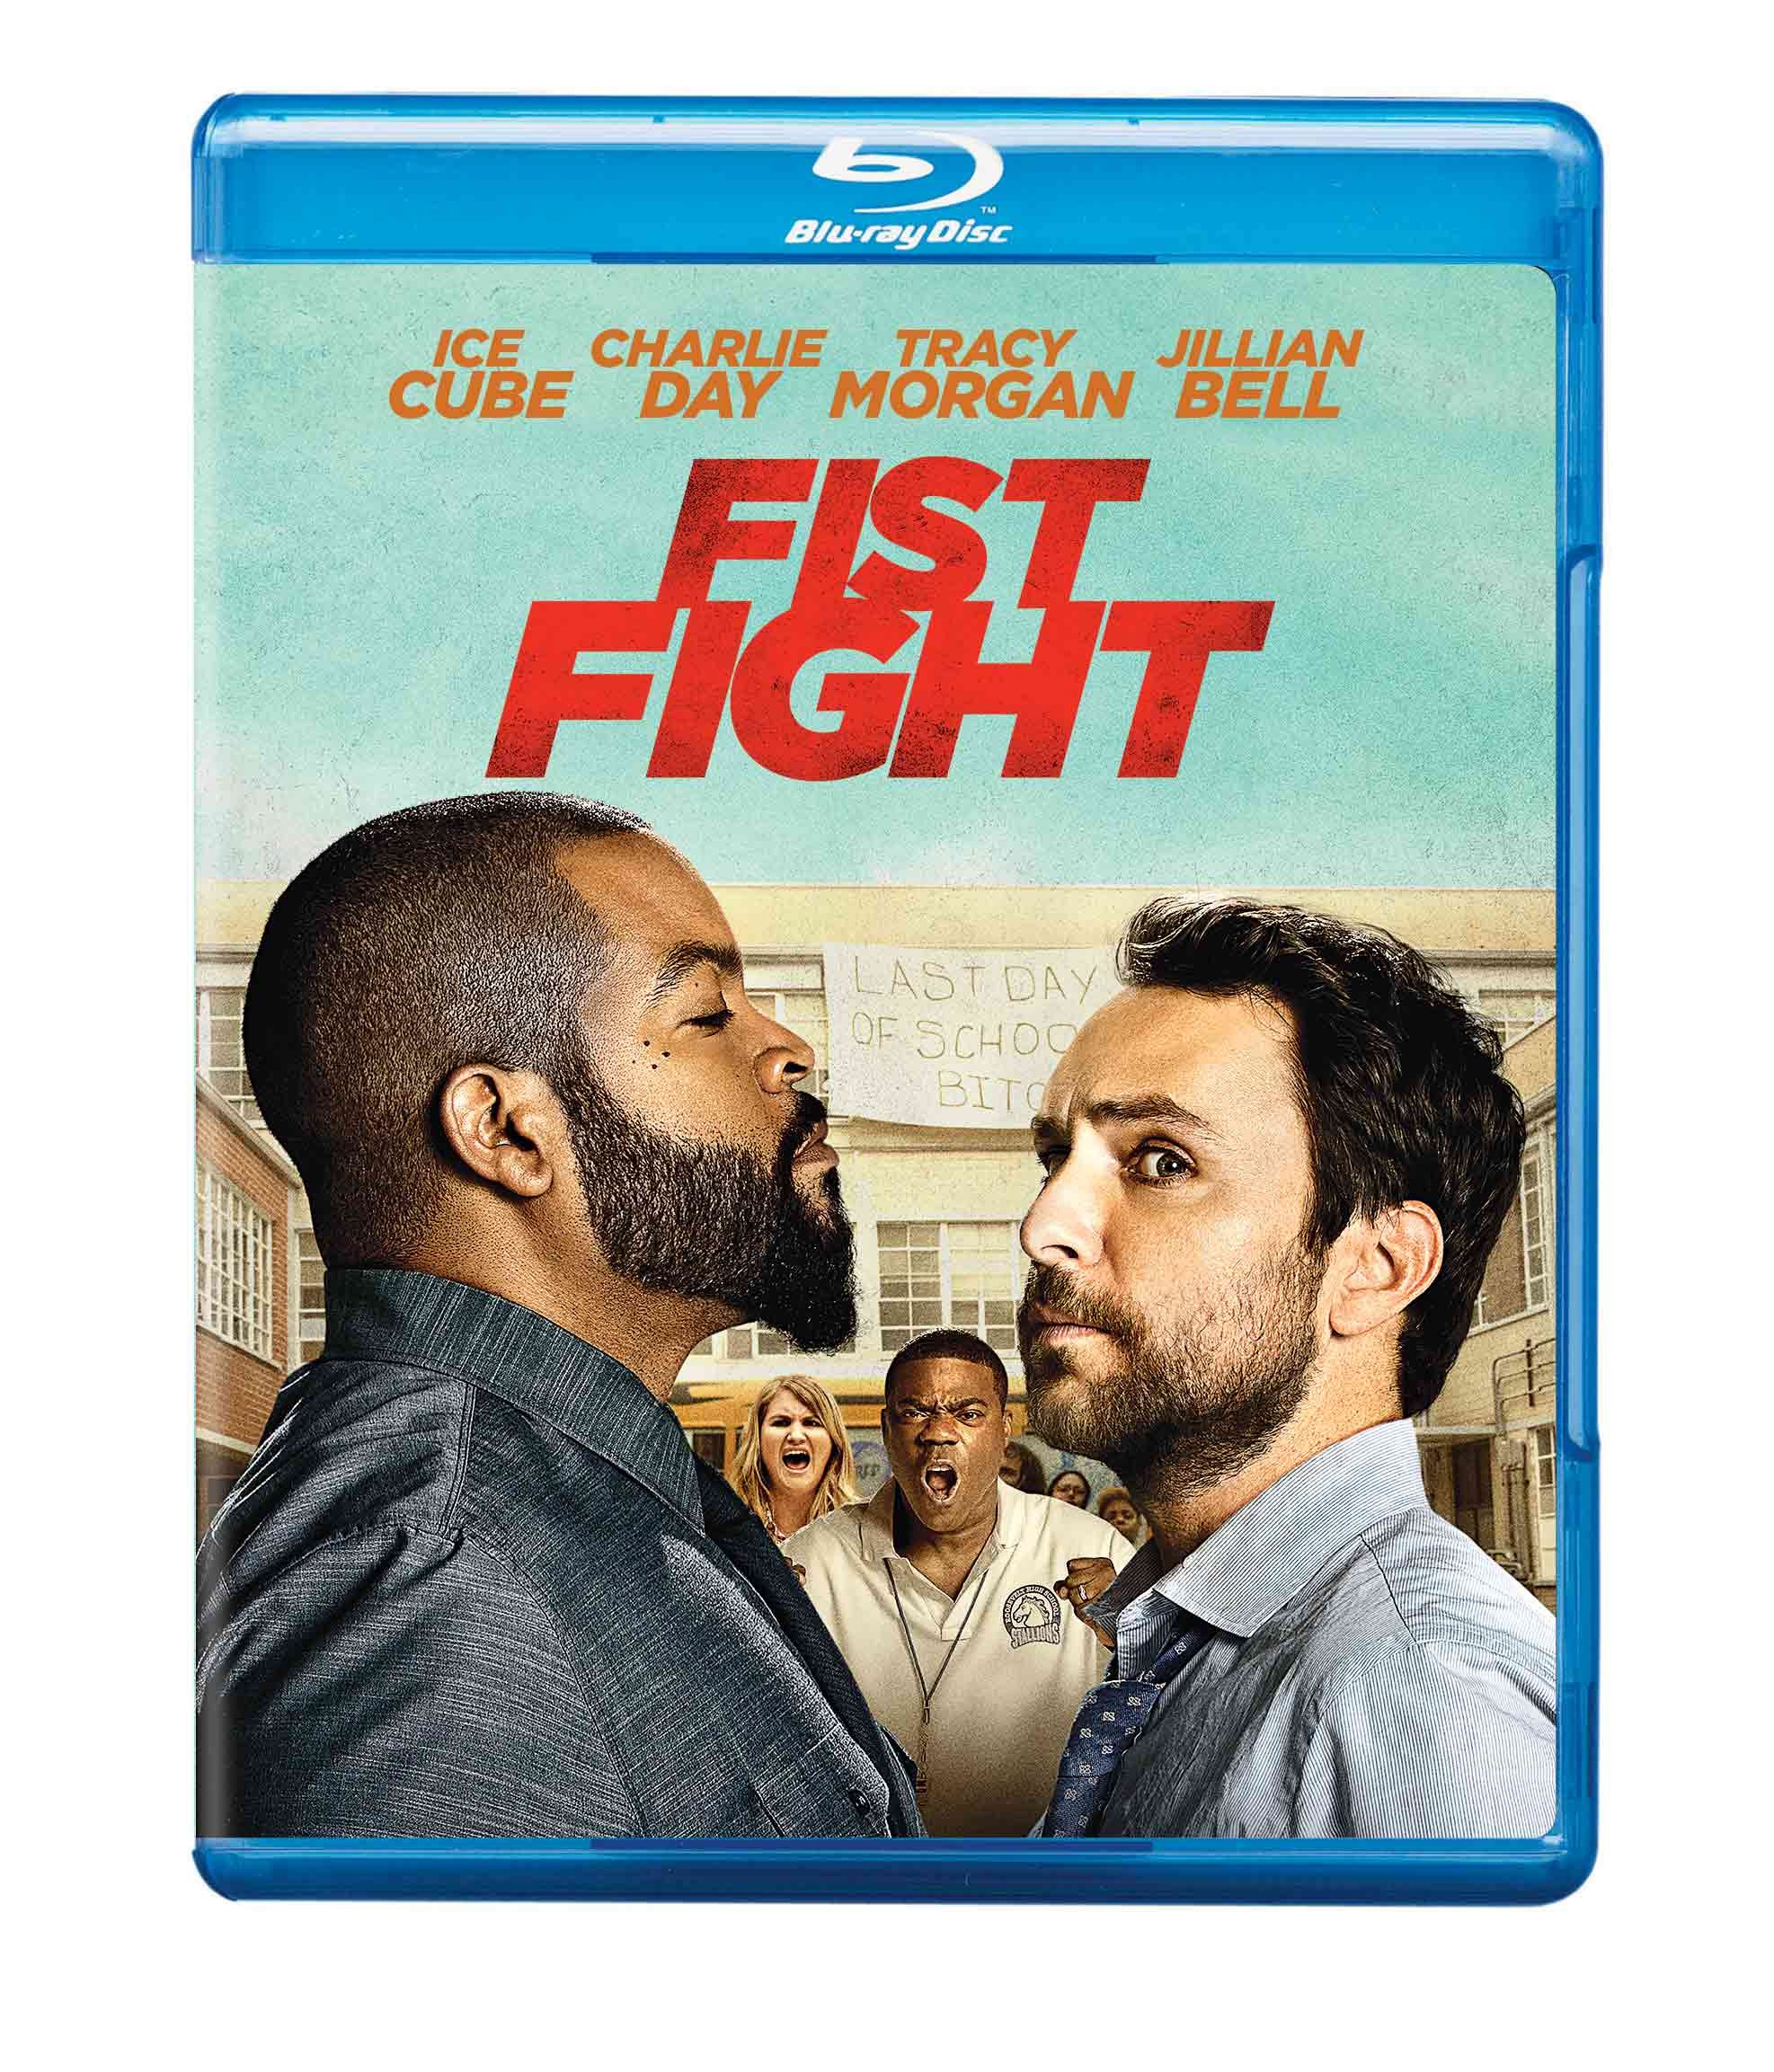 fist-fight-blu-ray-movie-purchase-or-watch-online